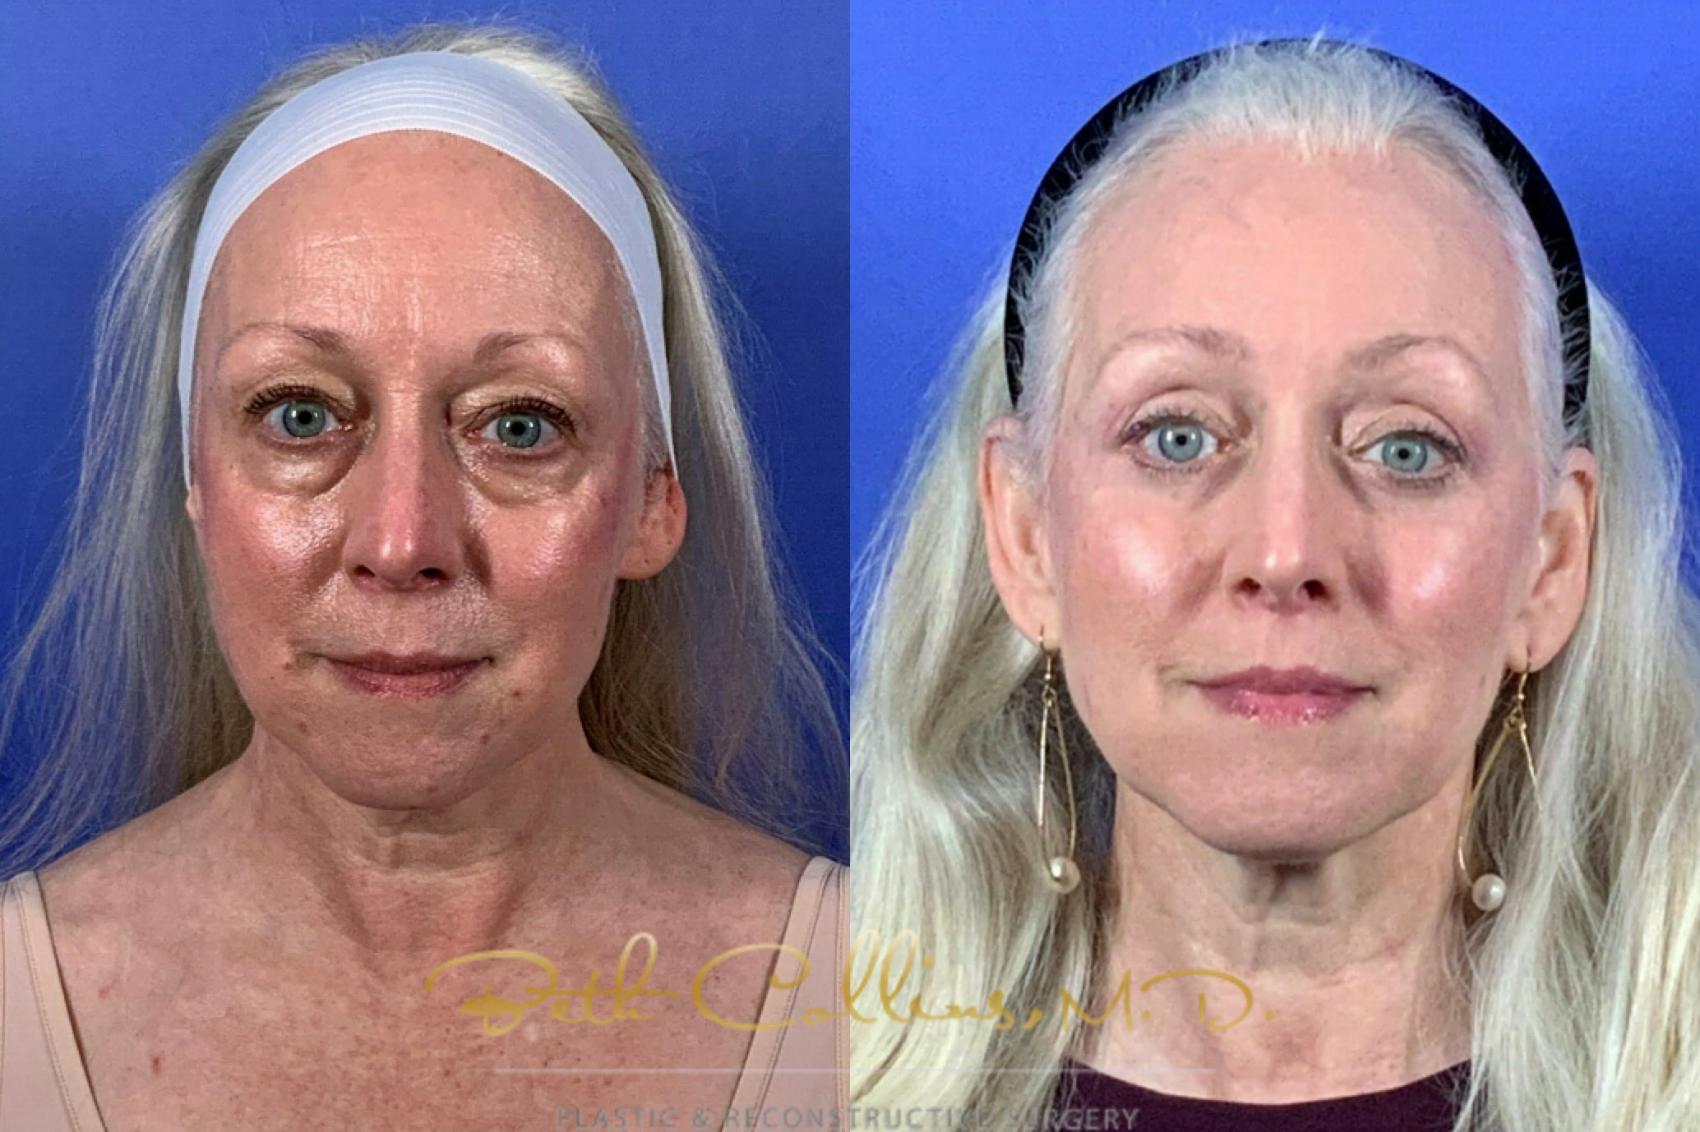 Upper and lower lid blepharoplasty with endoscopic brow lift